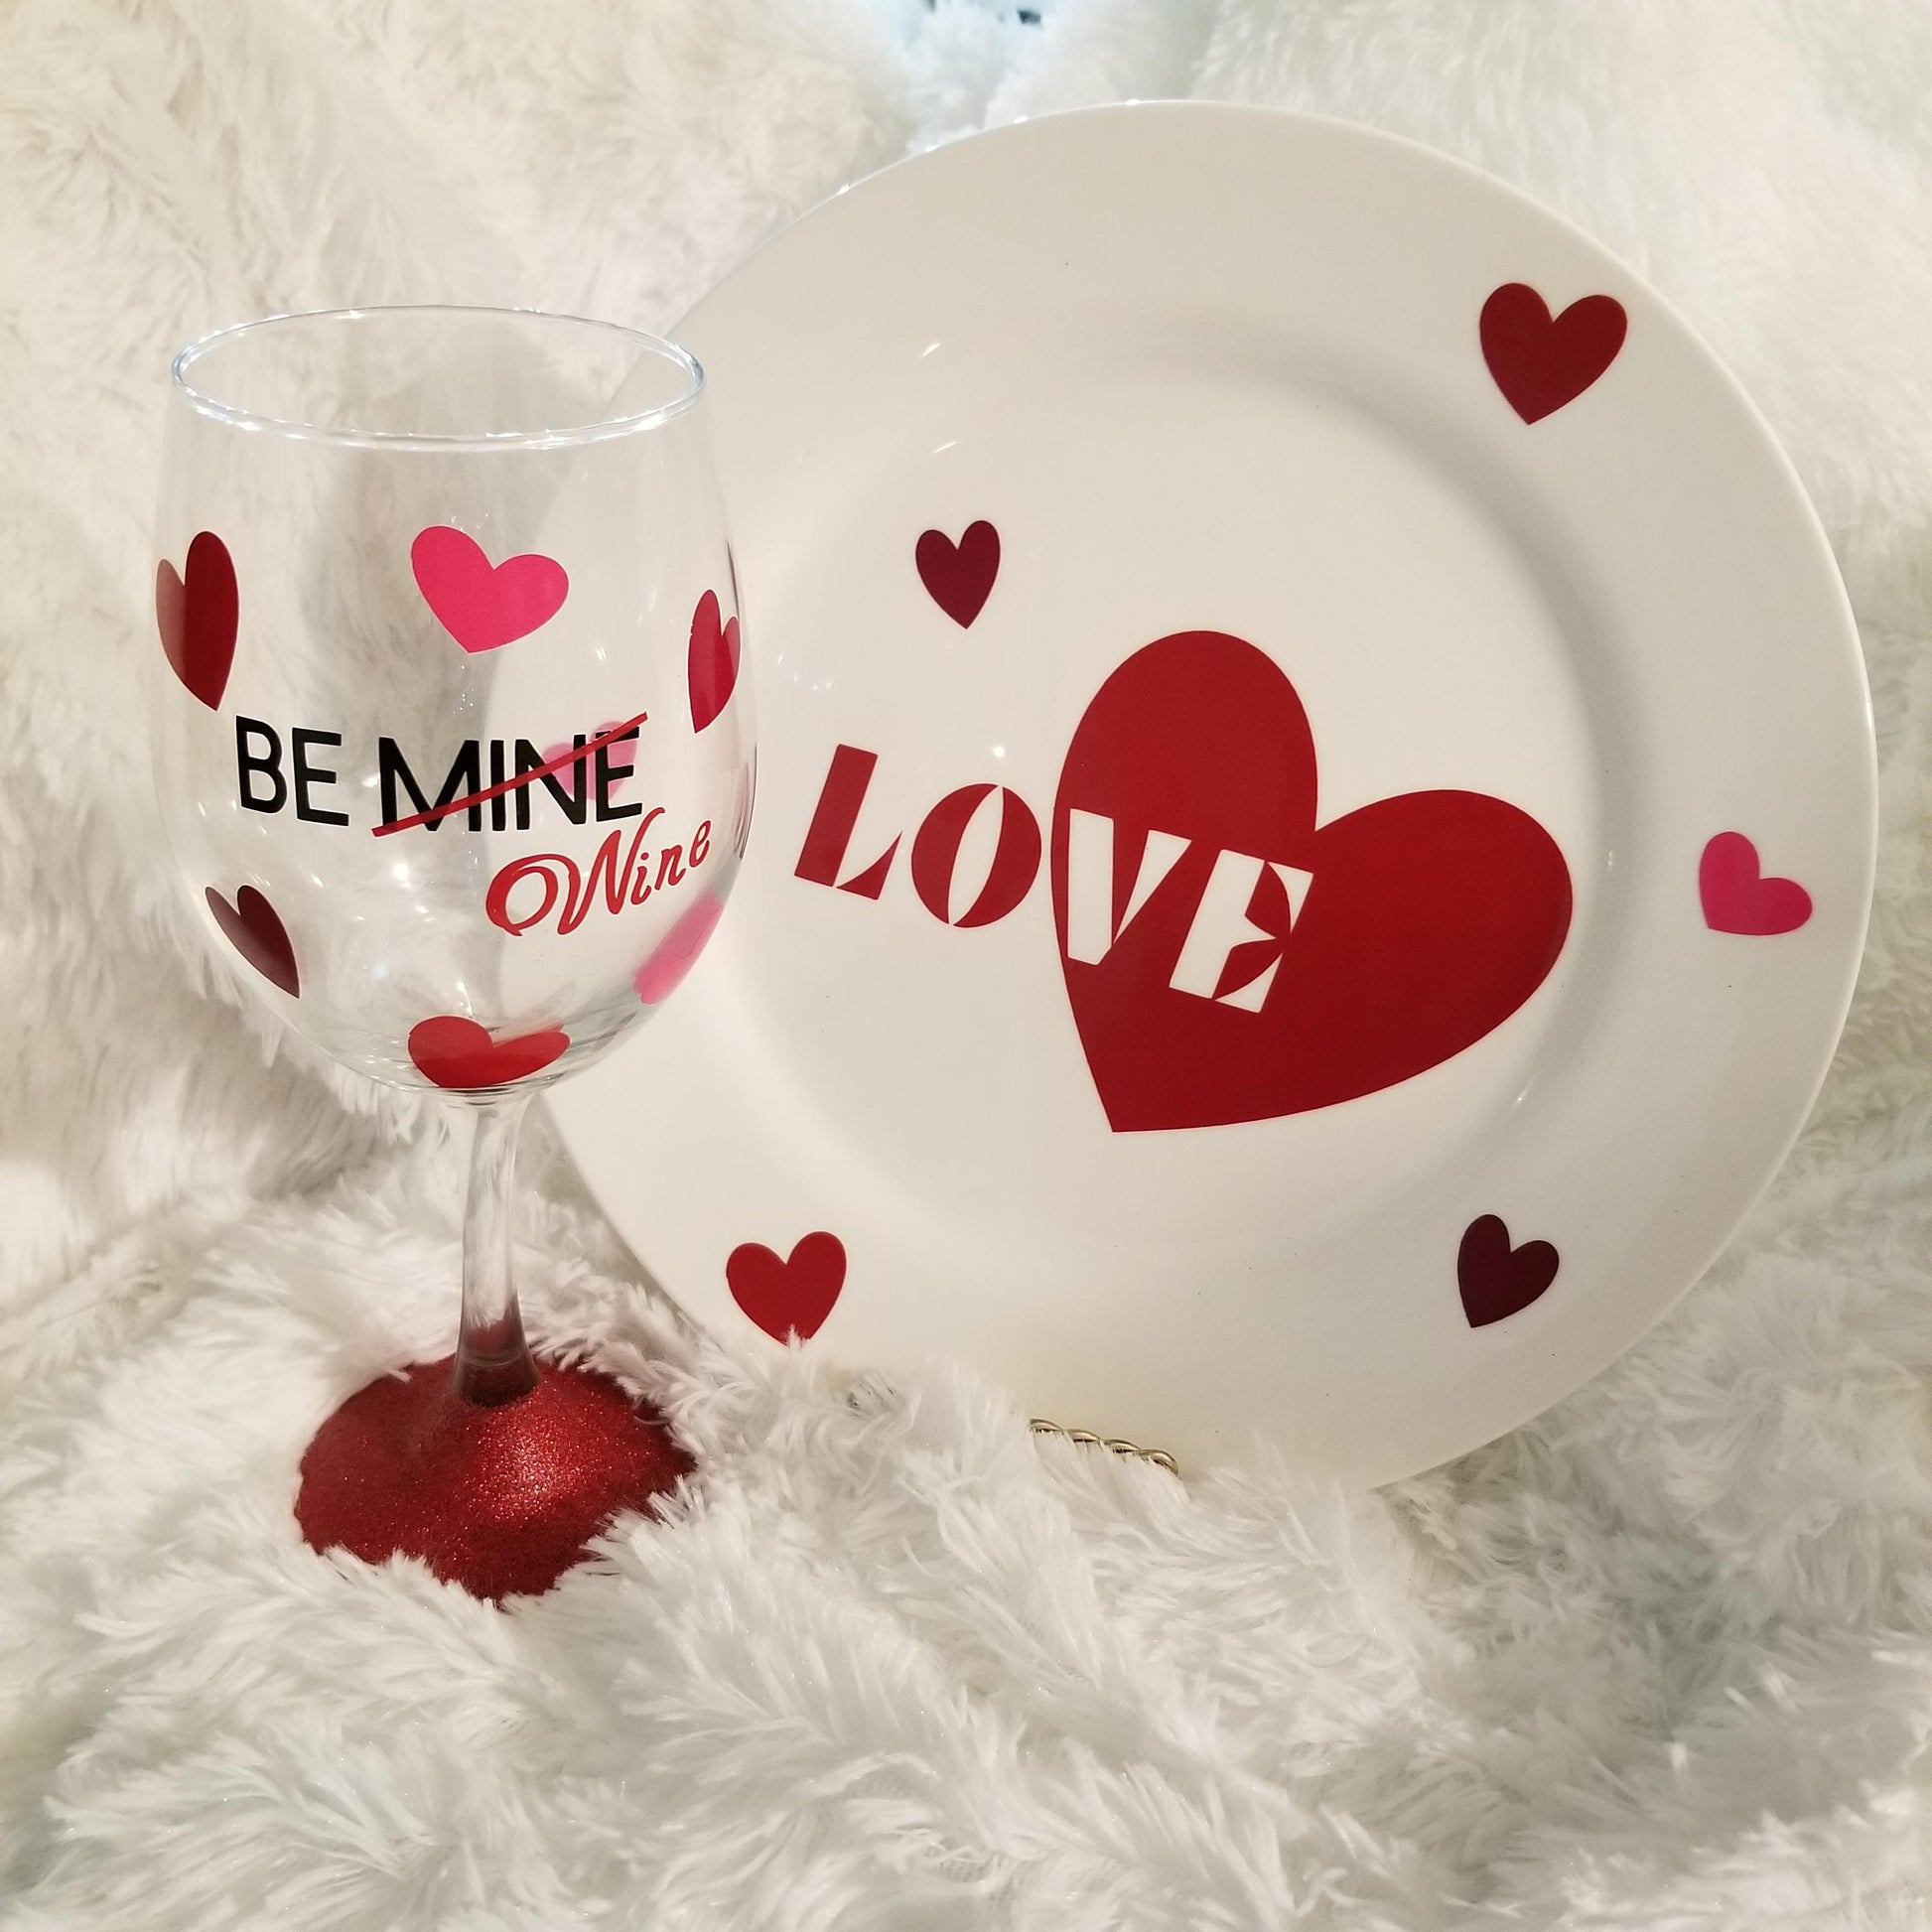 AntiValentine's Gift, Funny Wine Glass, Anti Valentines Day, Singles Gift, Friends Gift, Valentine for Her, Valentine's Day Gift, BE MINE - CCCreationz